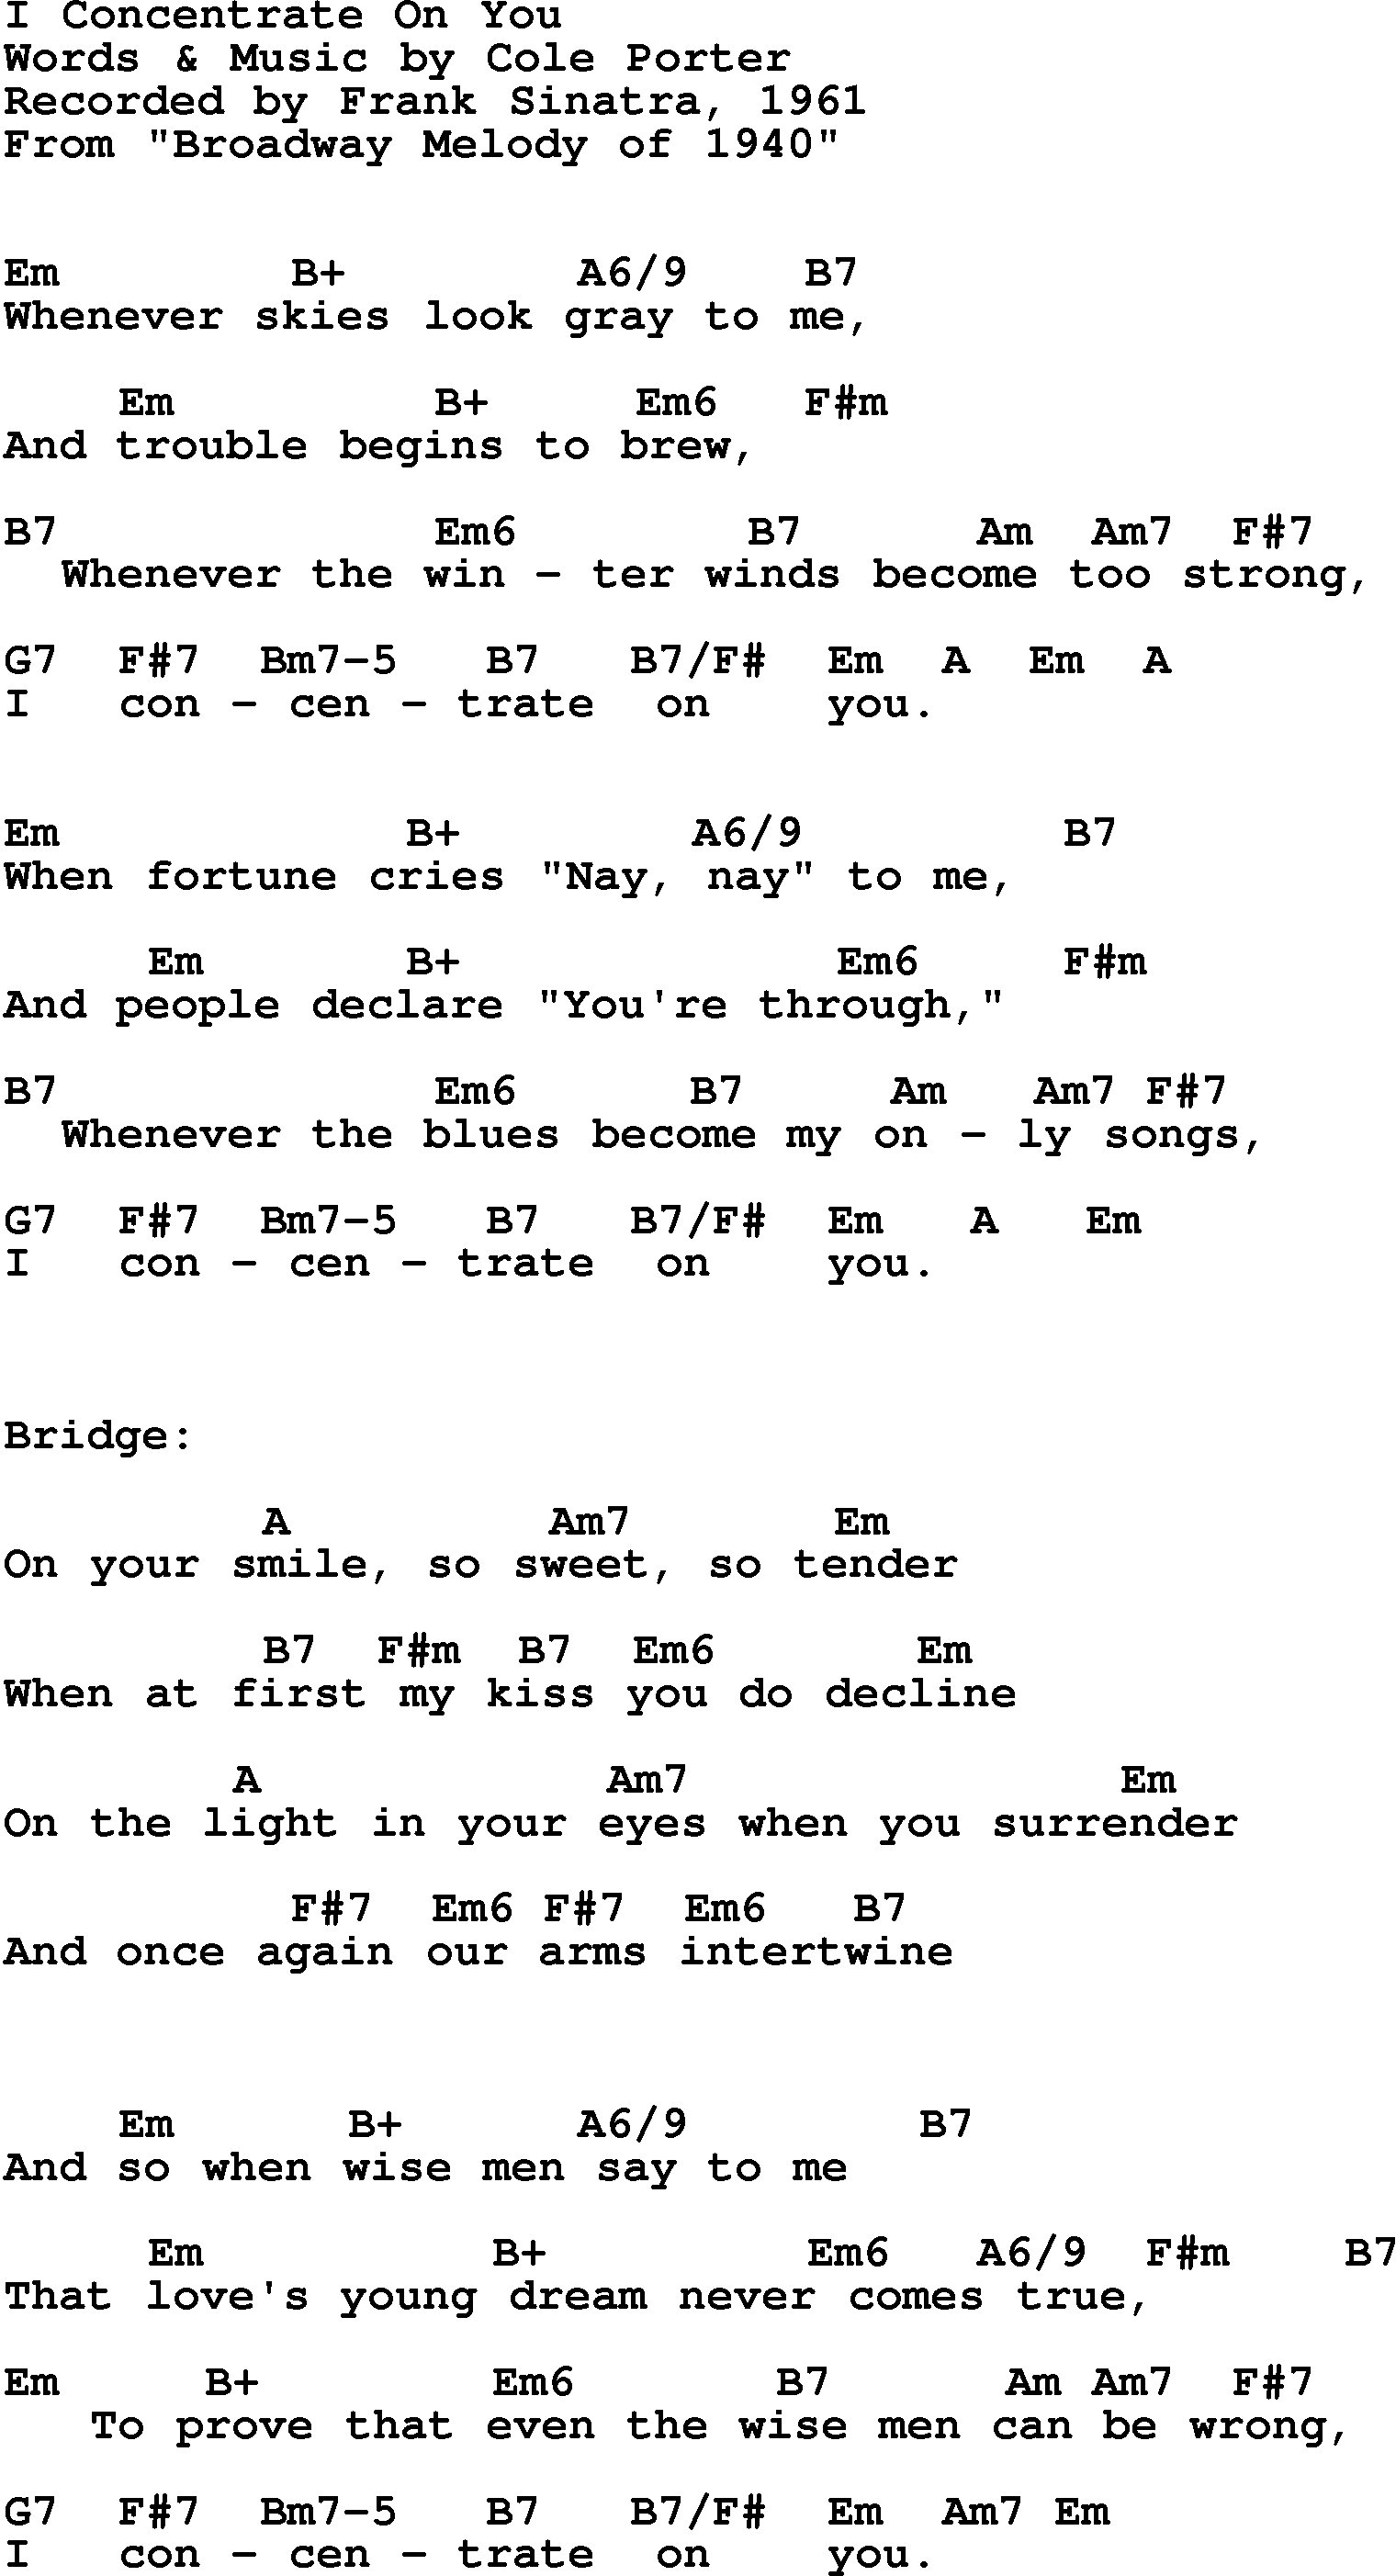 Song Lyrics with guitar chords for I Concentrate On You -  frank Sinatra, 1961